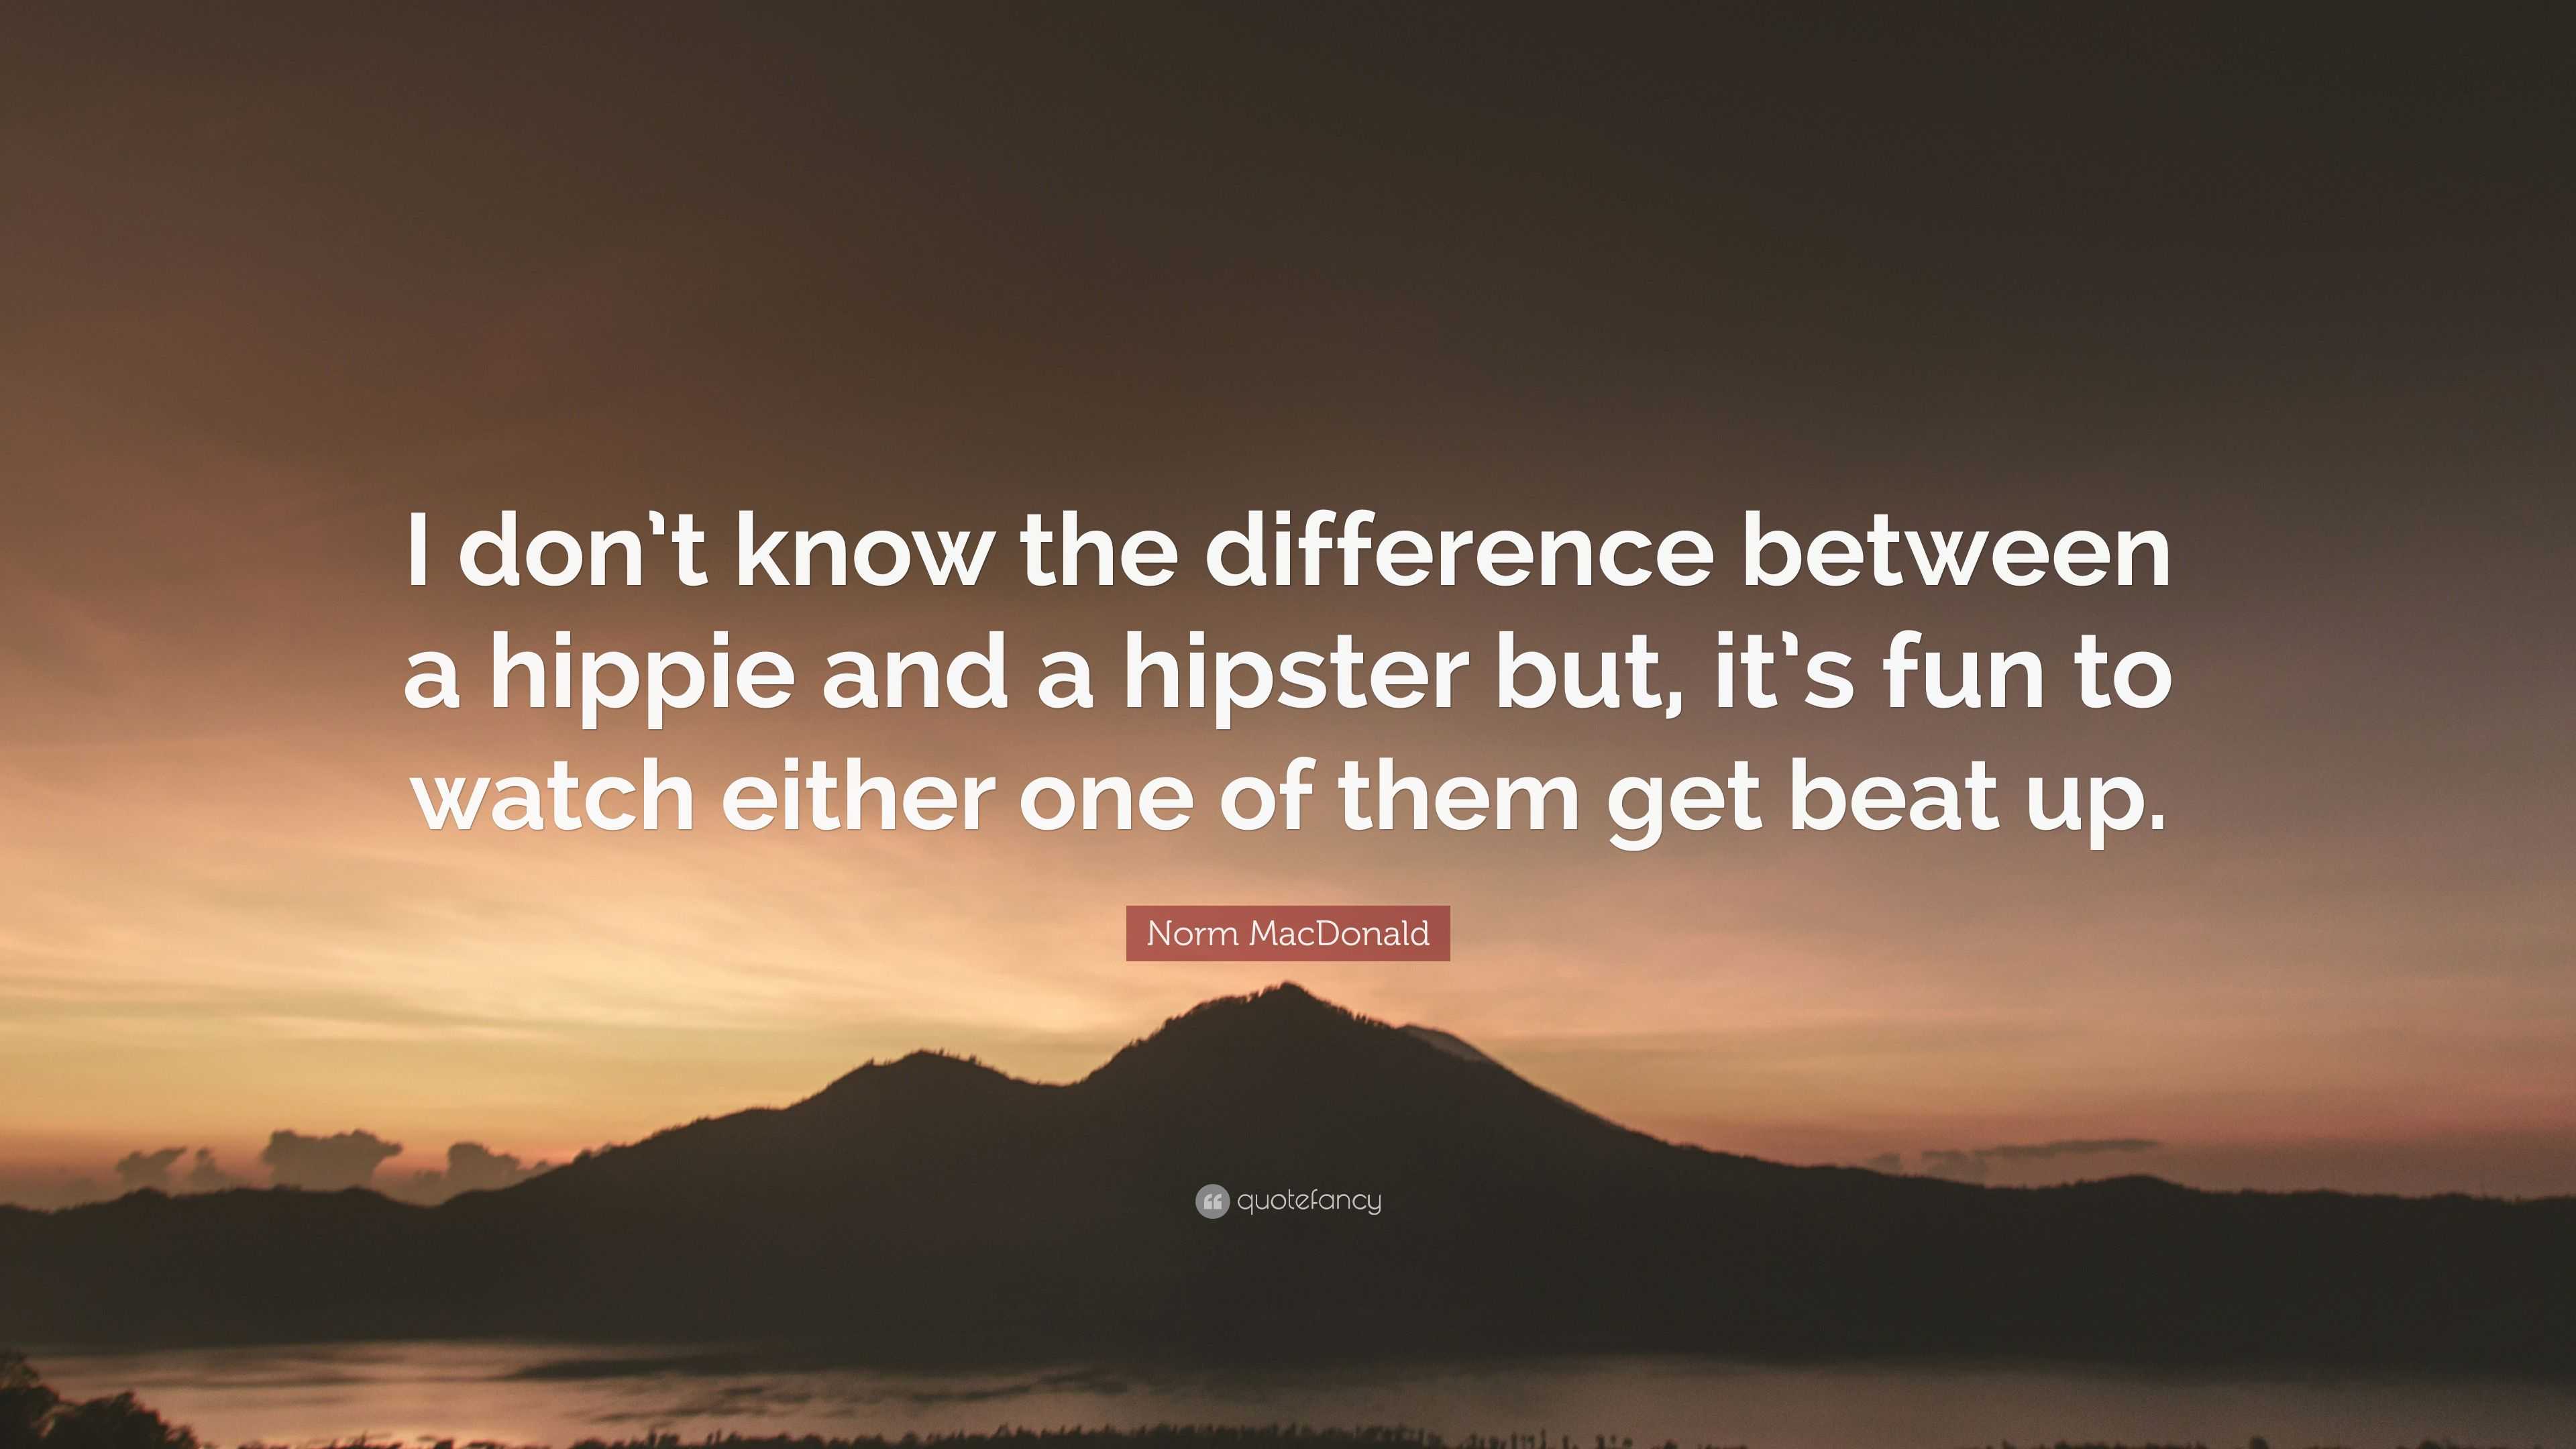 Norm MacDonald quote: I don't know the difference between a hippie and a